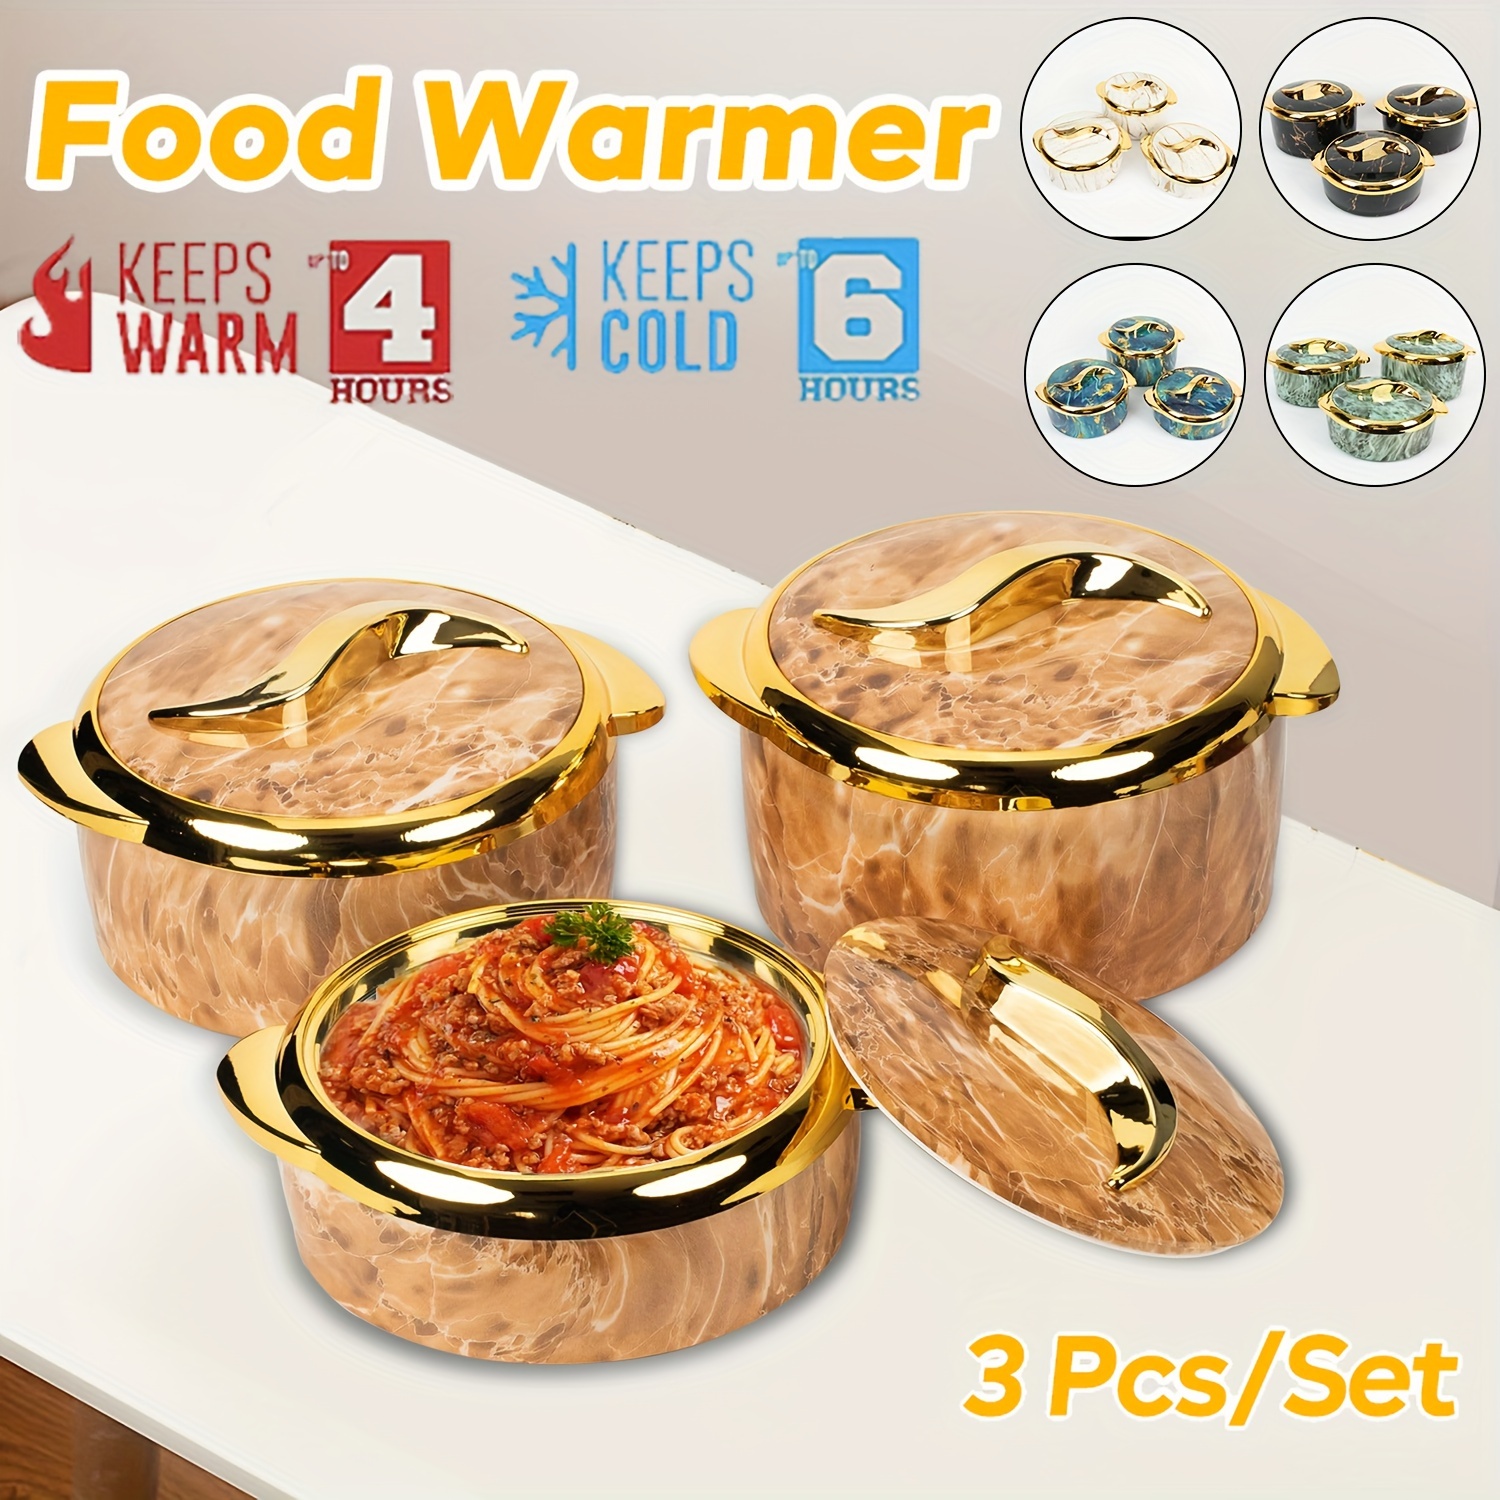 

Stainless Steel Food Warmer Set - 3-piece Insulated Serving Bowls With Lids For Hot And Cold Dishes, Chafing Dish Set For Catering, Buffet, And Entertaining - 1.5l, 2l, 2.5l Capacity